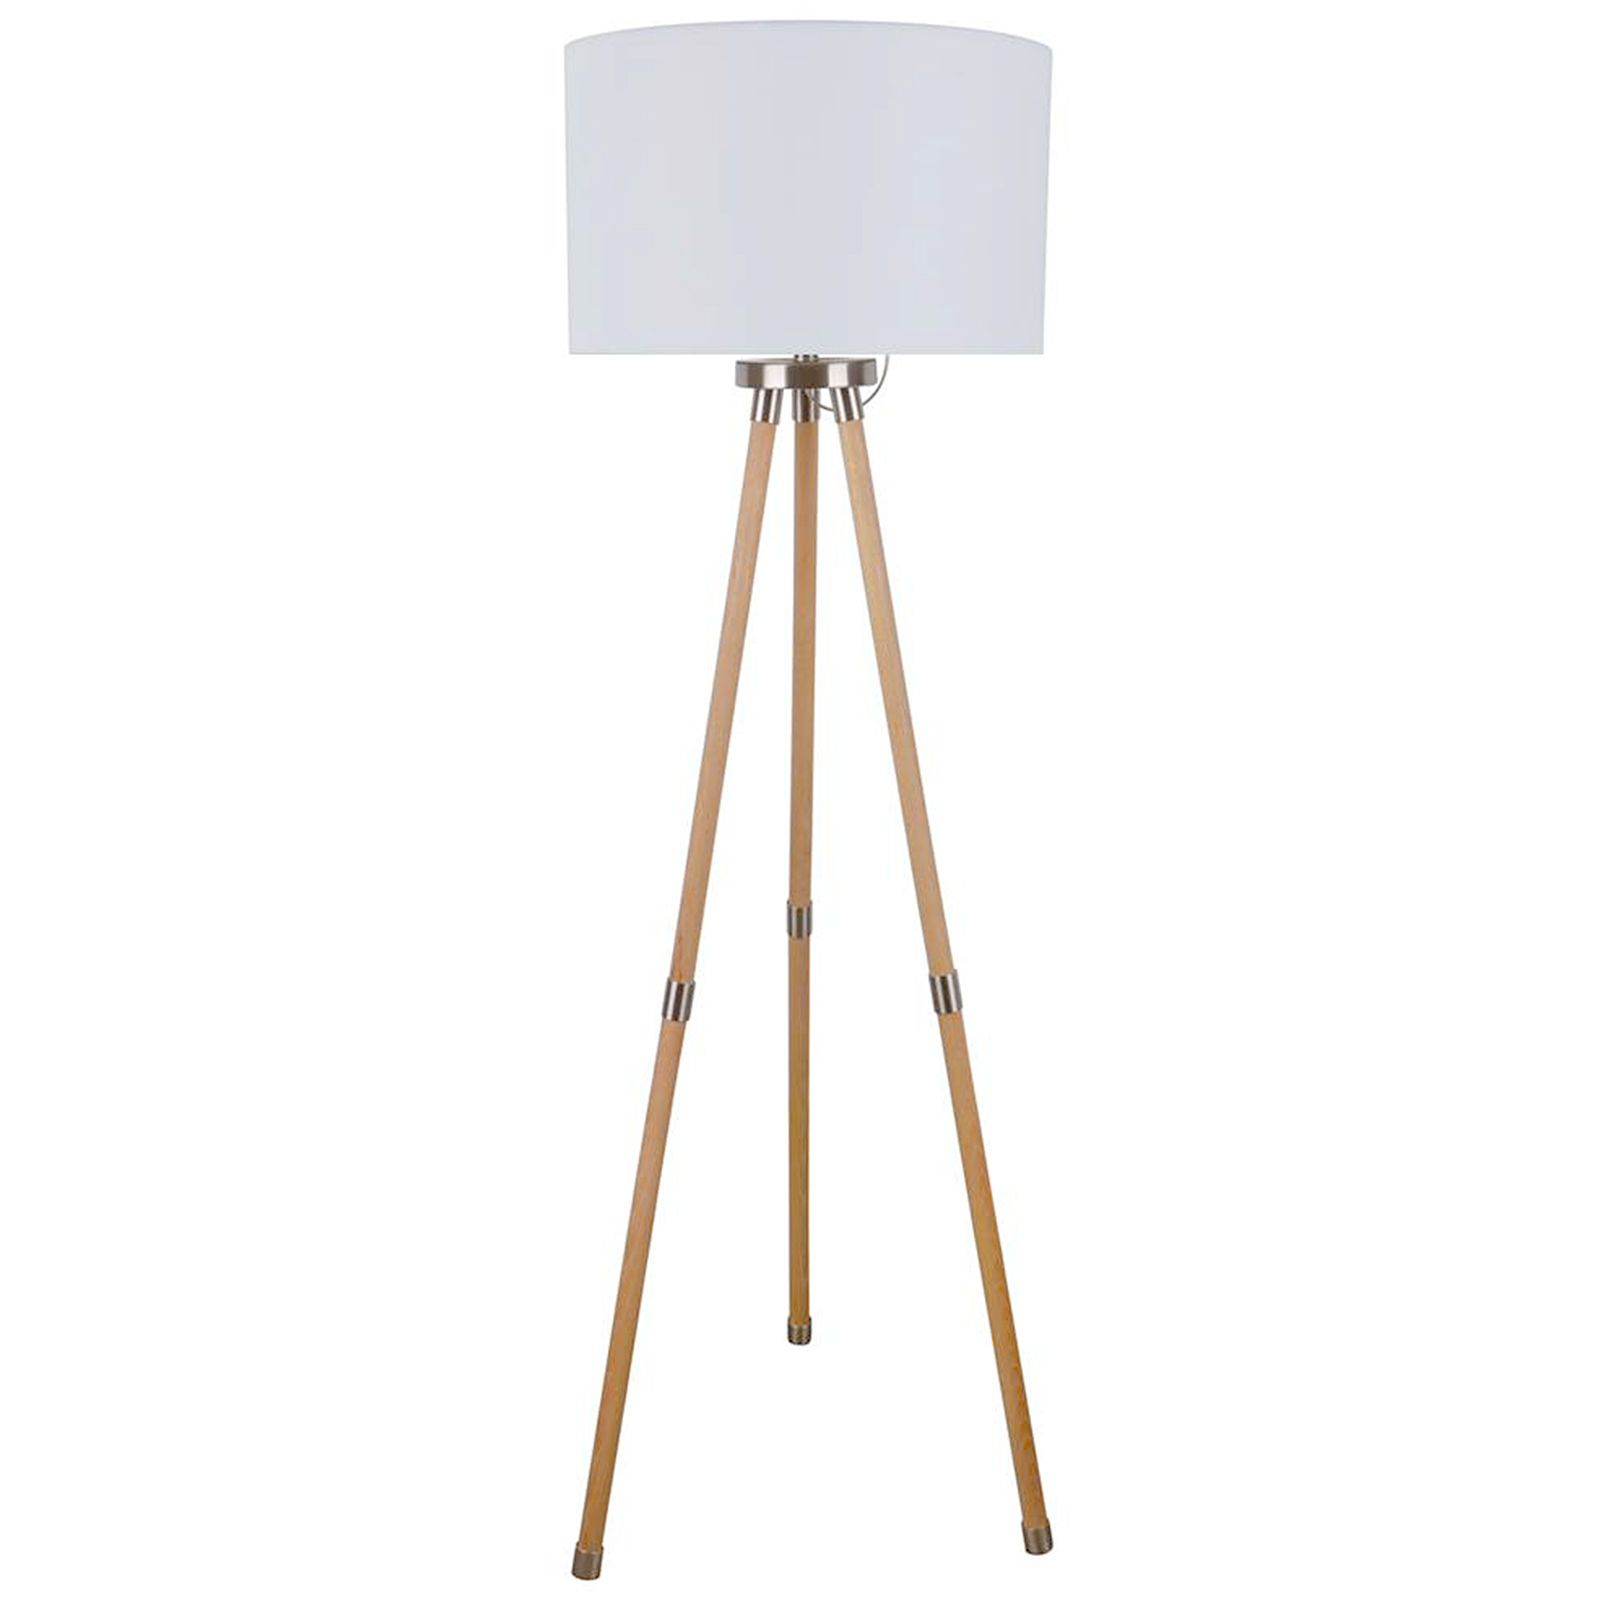 White Wooden Tripod Floor Lamp Lighting Wooden Tripod intended for sizing 1600 X 1600